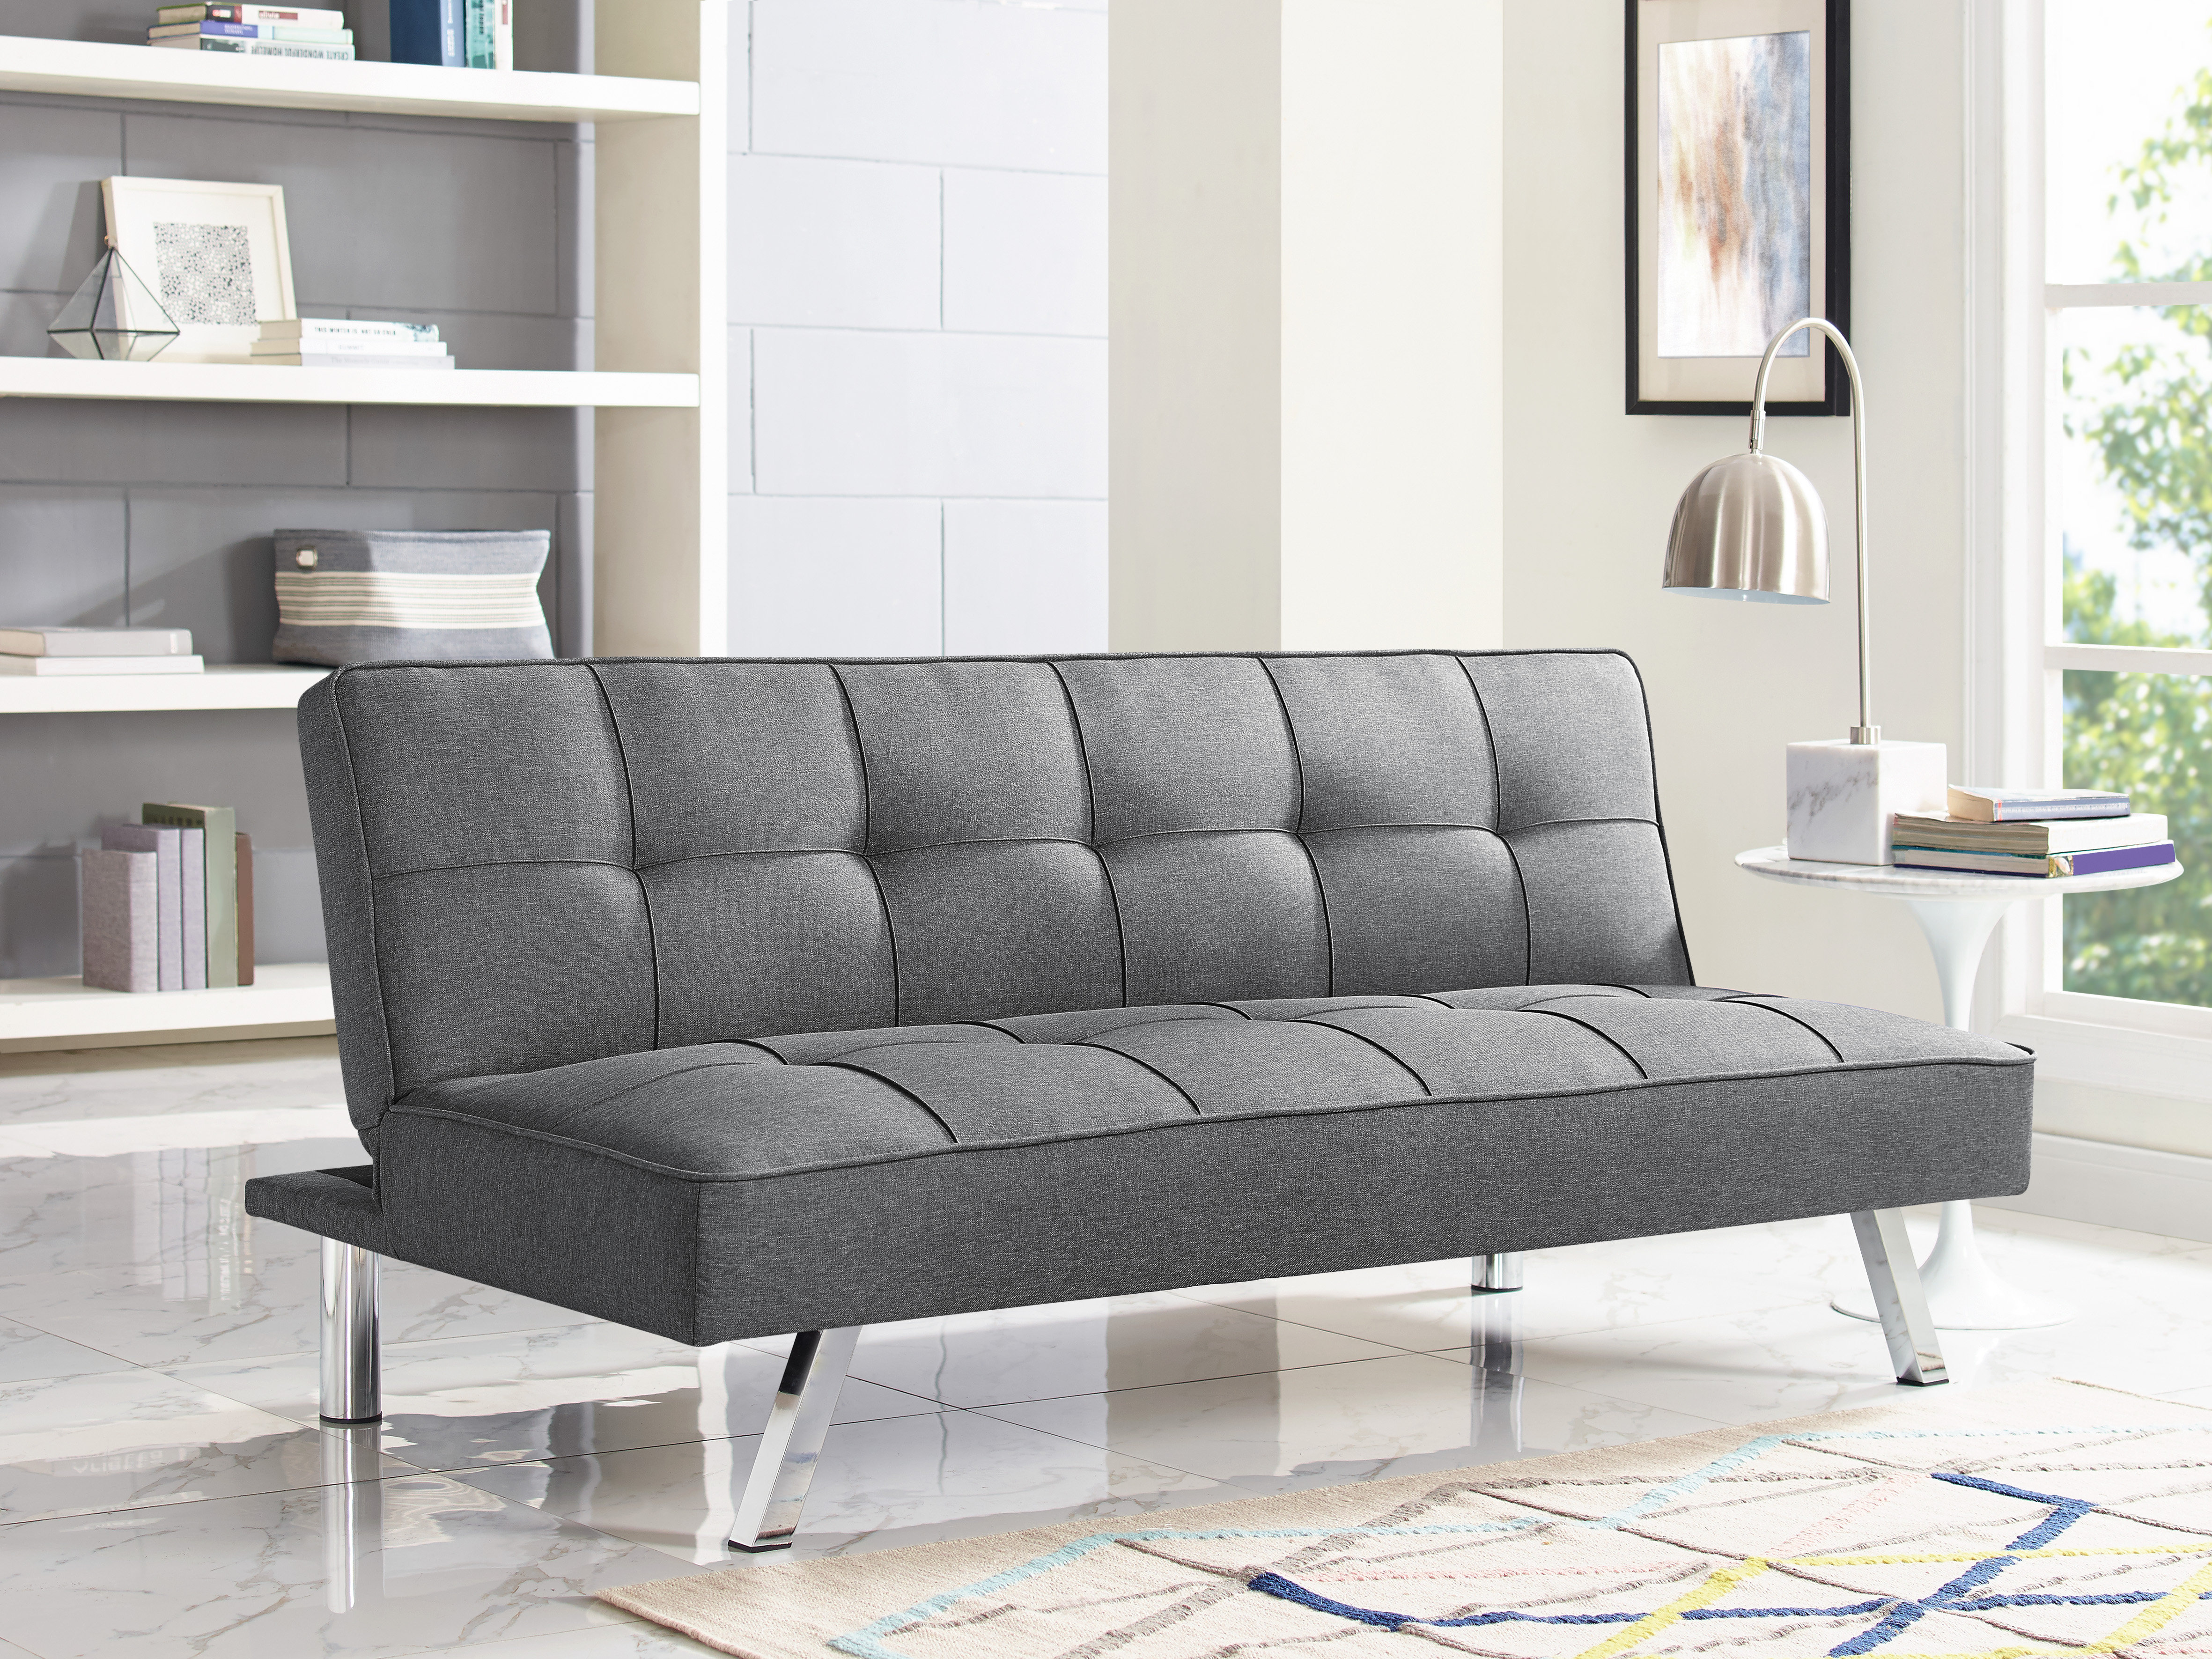 66.1″ Wide Tufted Back Convertible Sofa